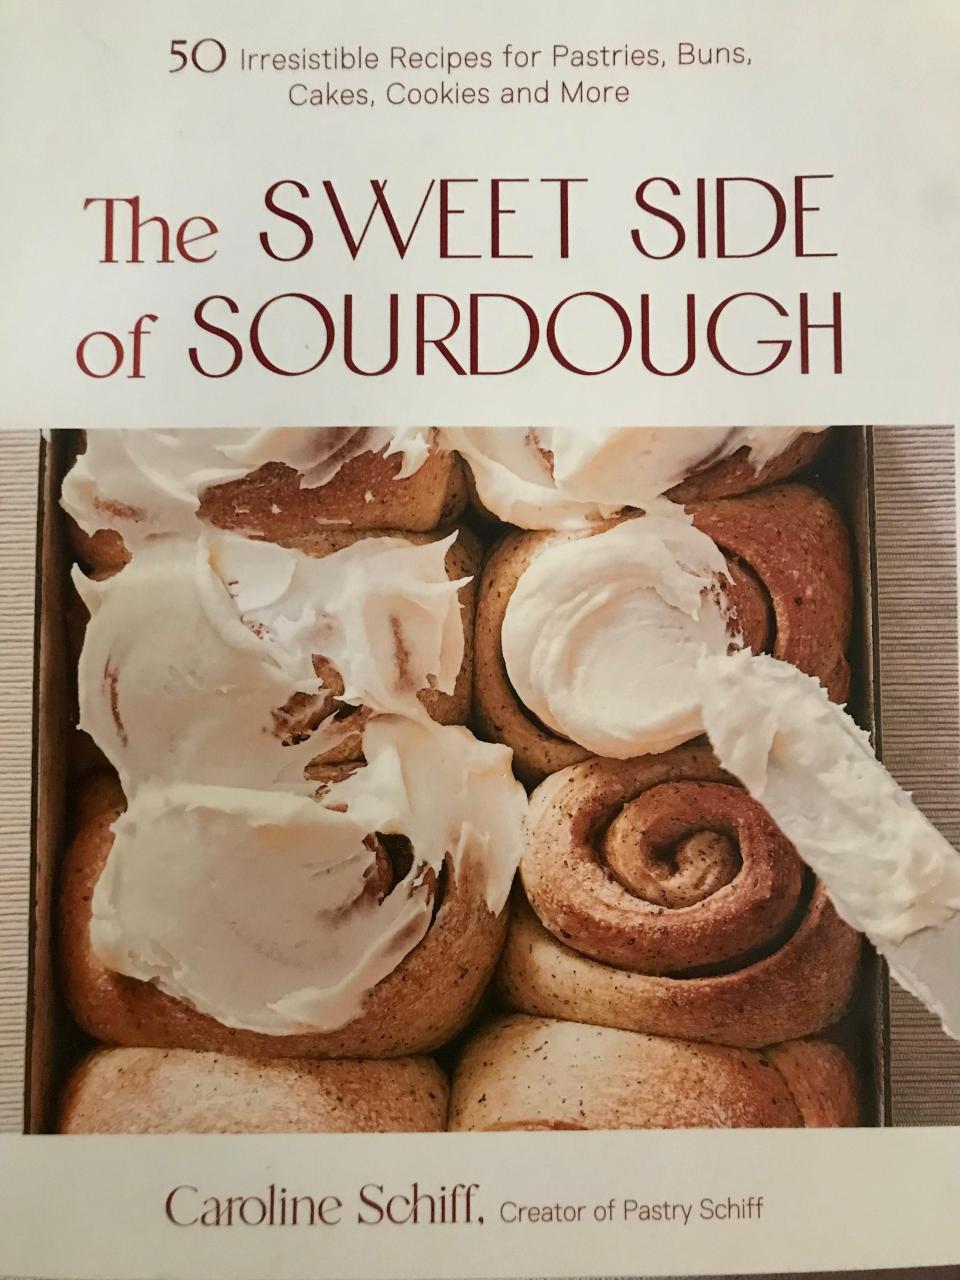 "The Sweet Side of Sourdough," by Caroline Schiff, looks beyond savory bread for activated and discarded sourdough starter.